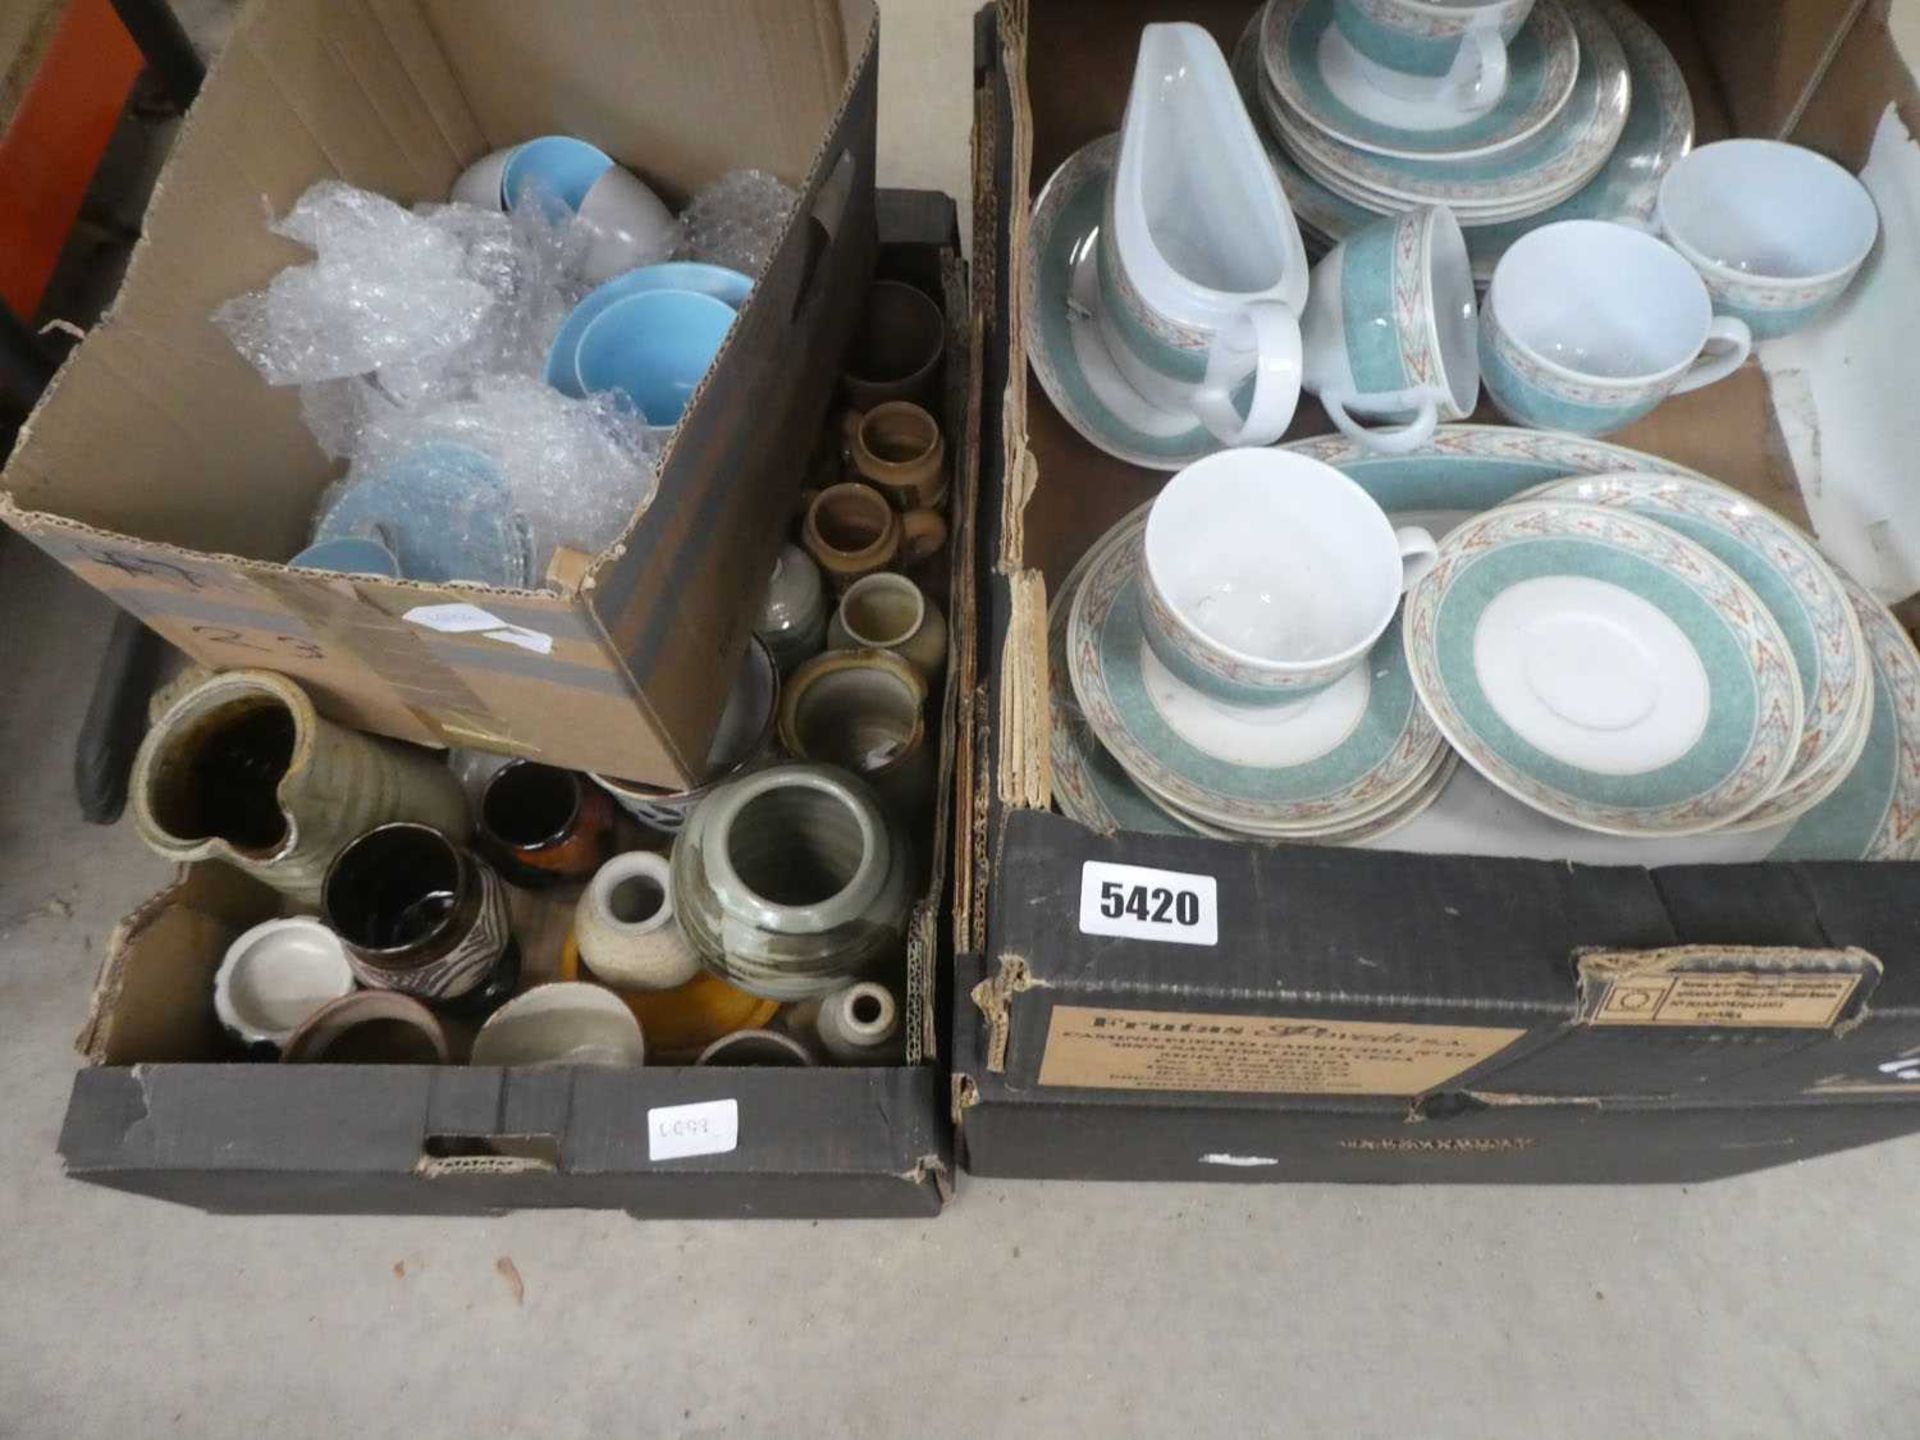 3 x boxes containing Wedgwood crockery, glass shades, Poole pottery and studio ware